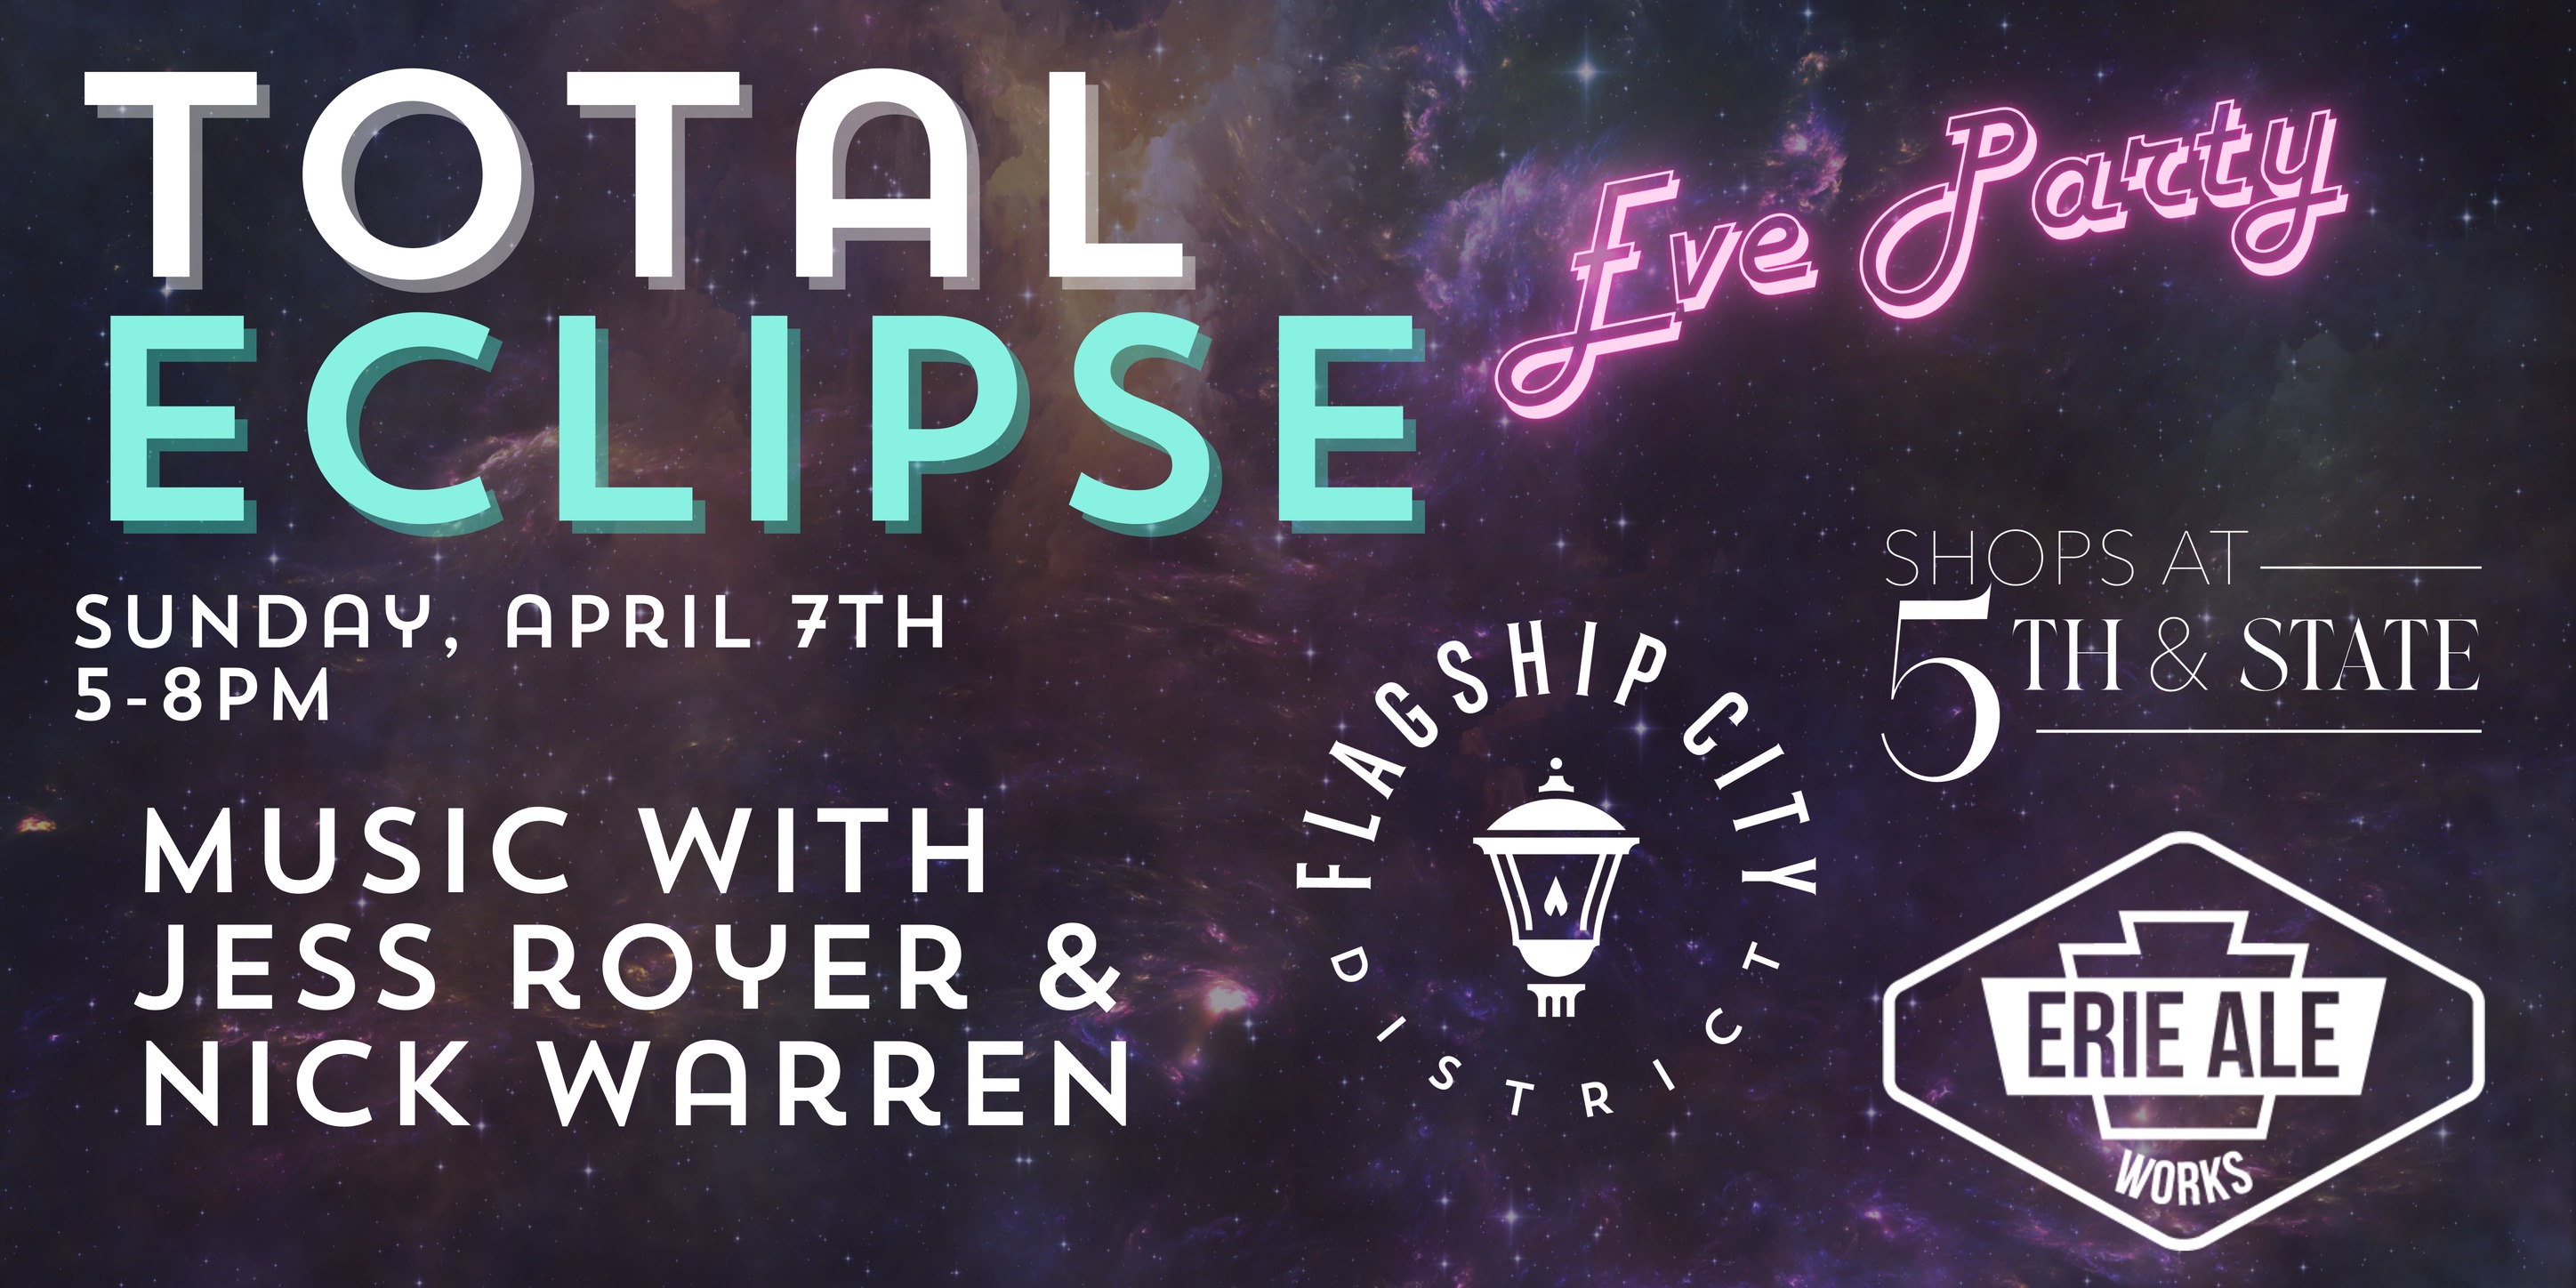 Total Eclipse Eve Party